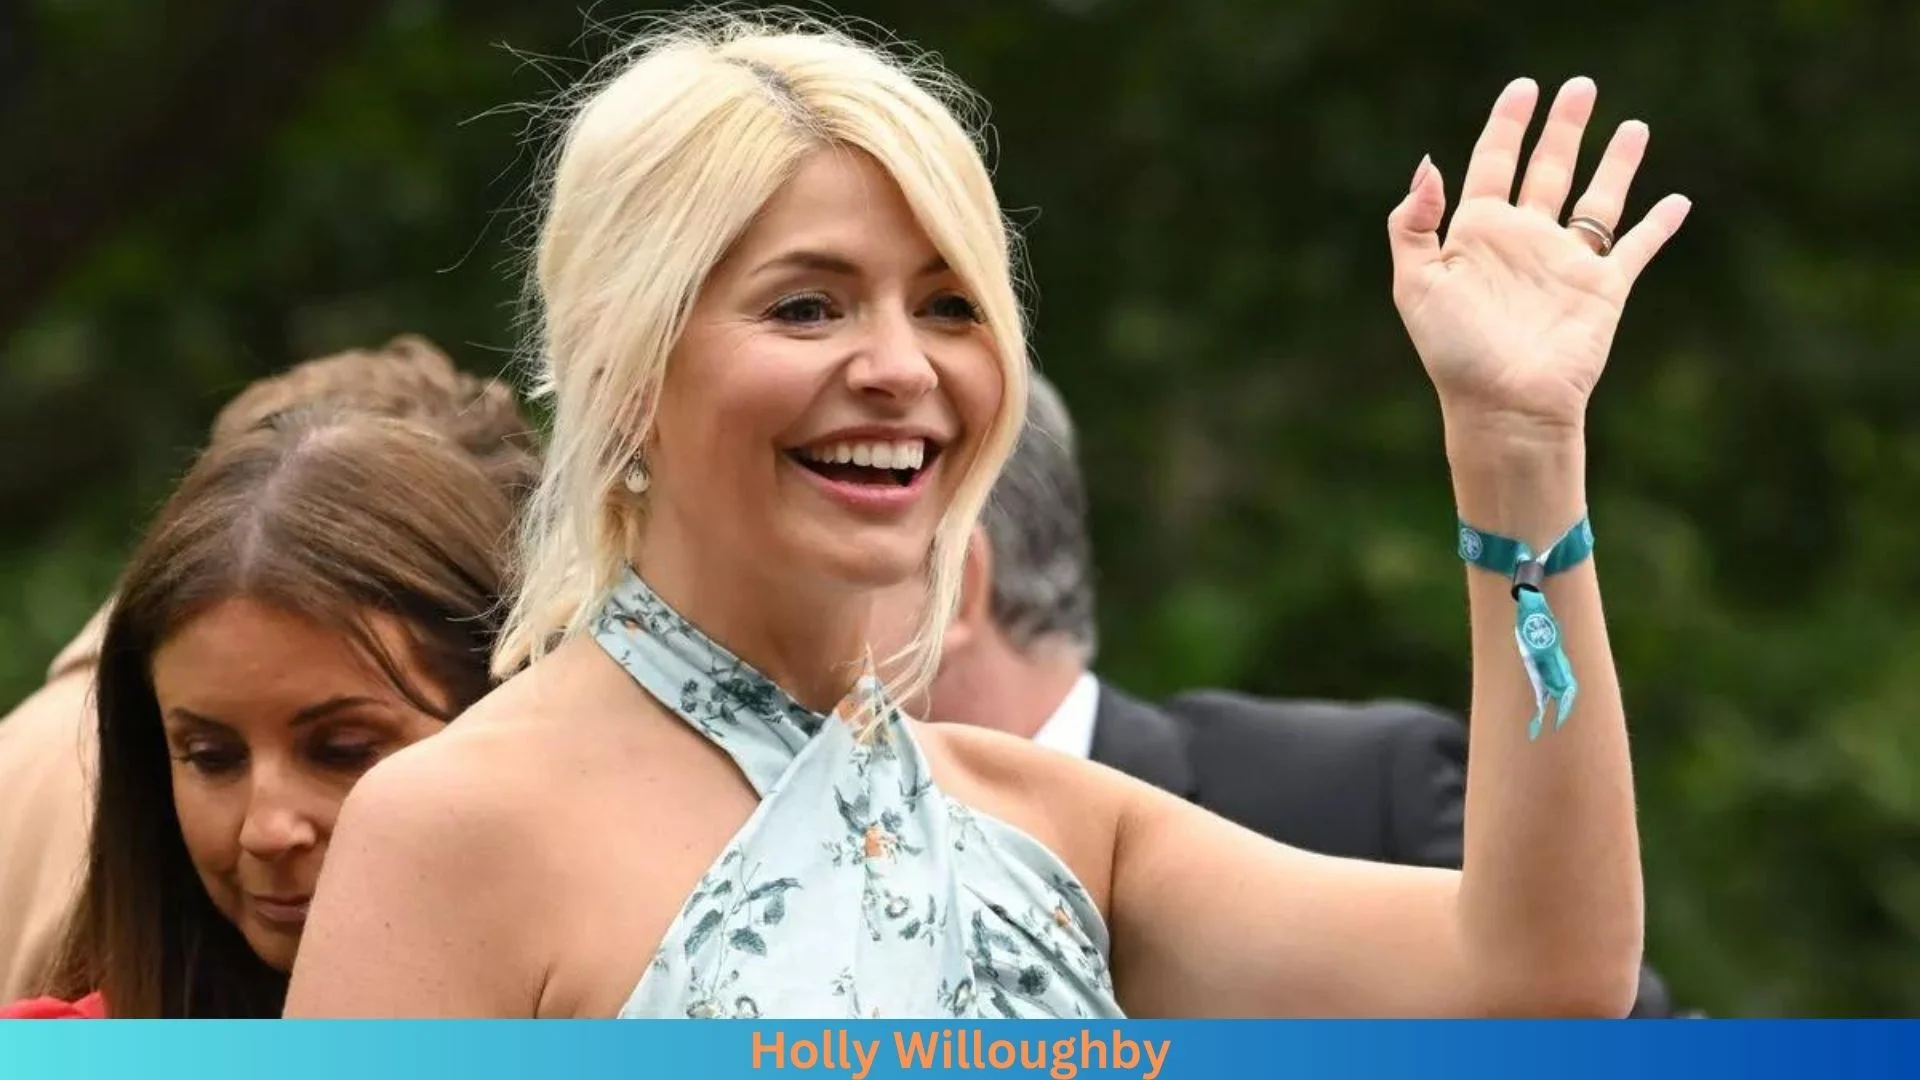 Net Worth of Holly Willoughby